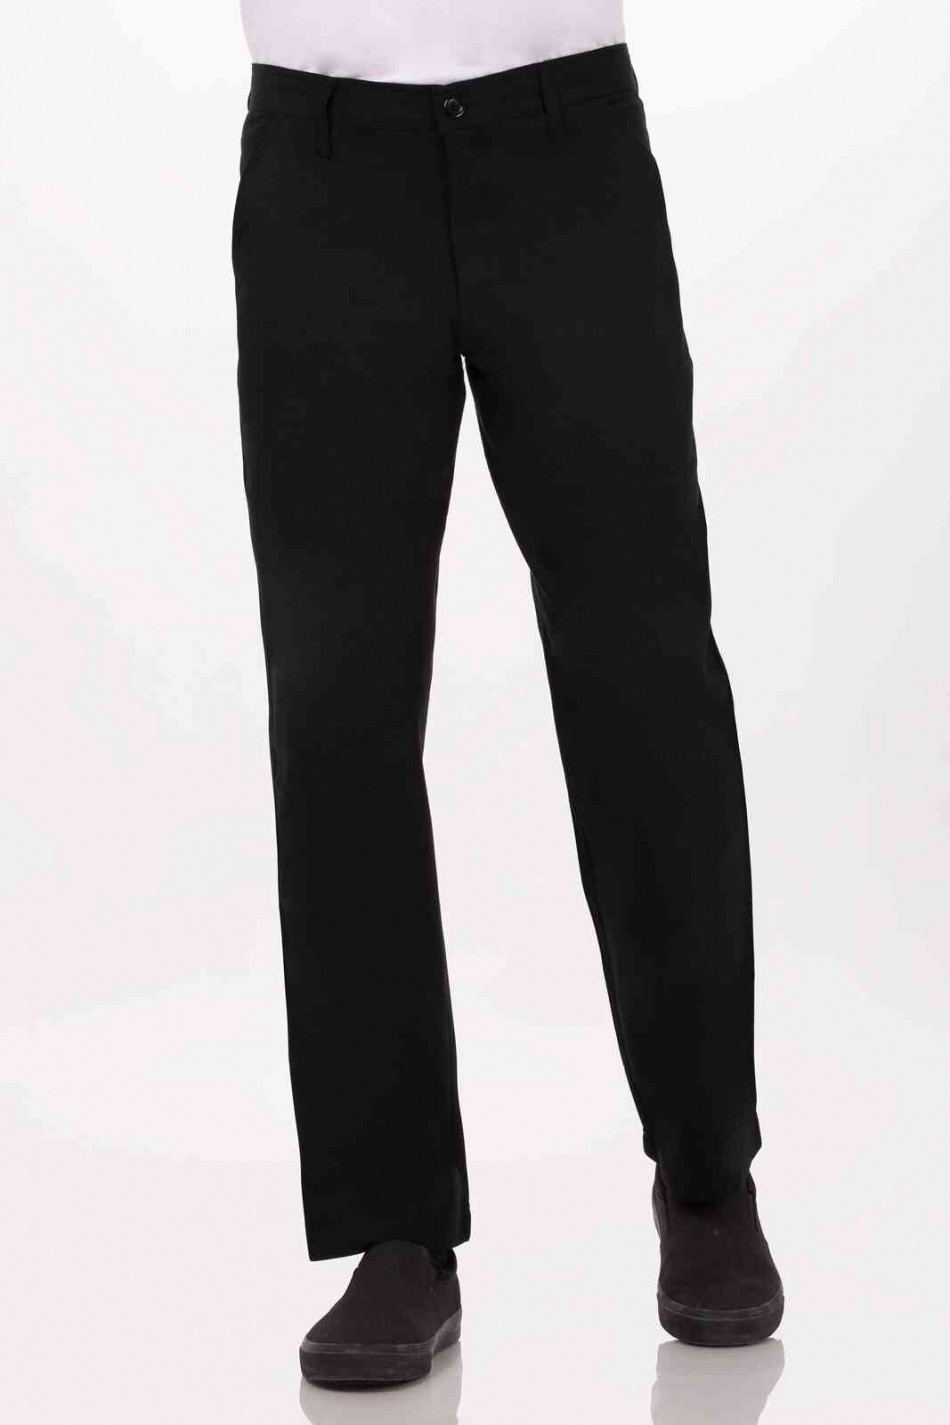 Black Constructed Chef Pants by Chef Works